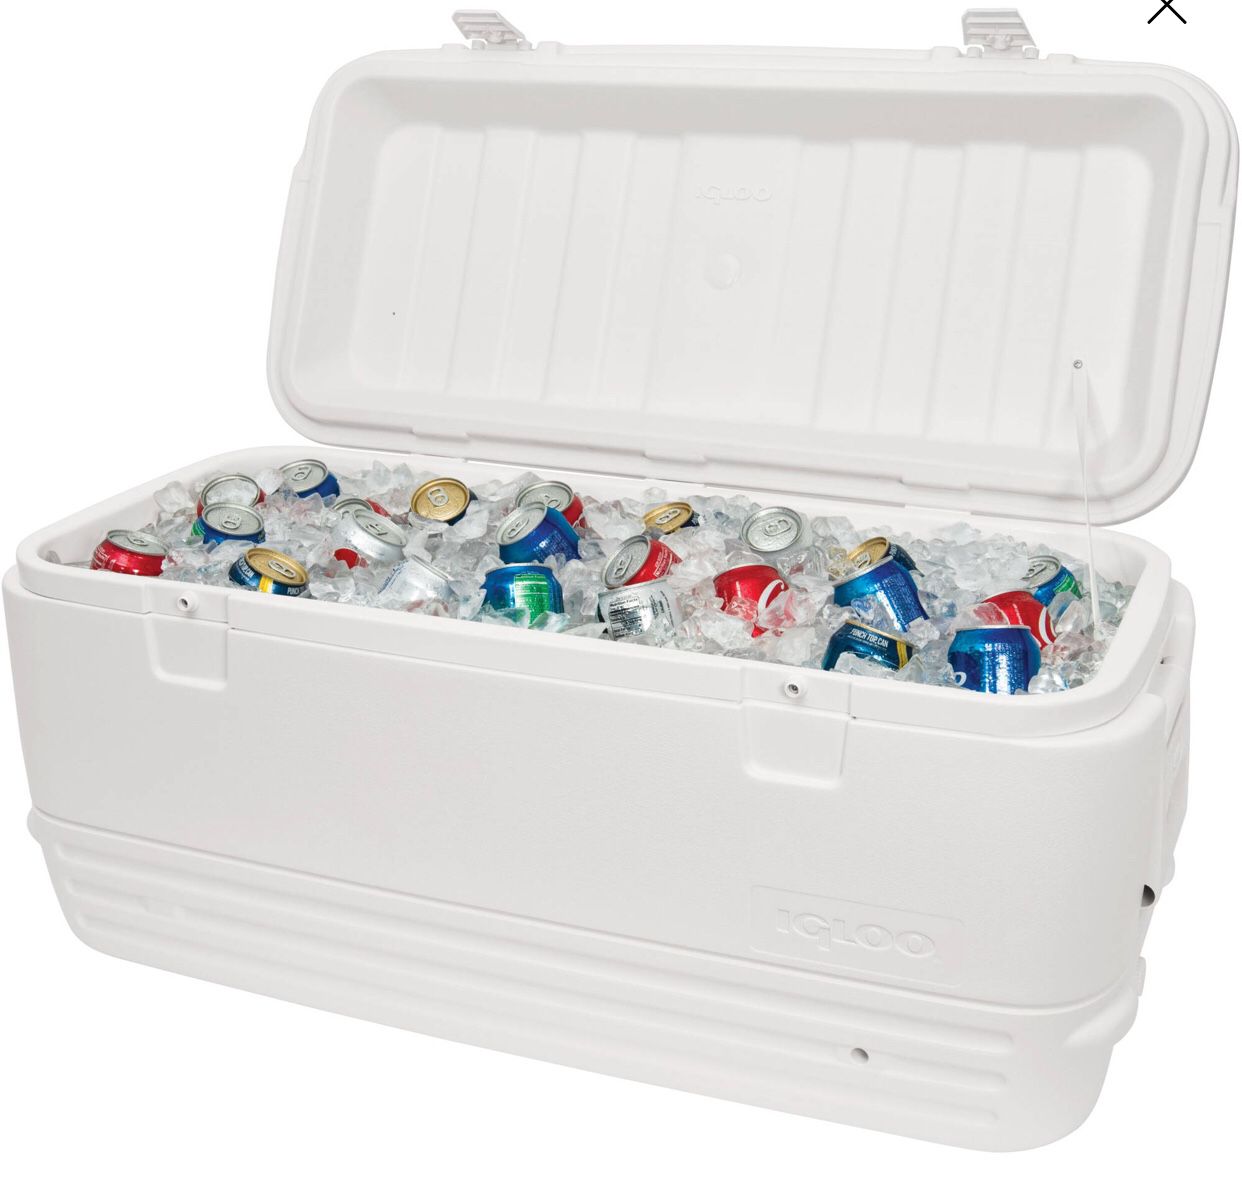 120qt Heavy Duty Cooler Ice Chest Beach Camping Tailgate BBQ